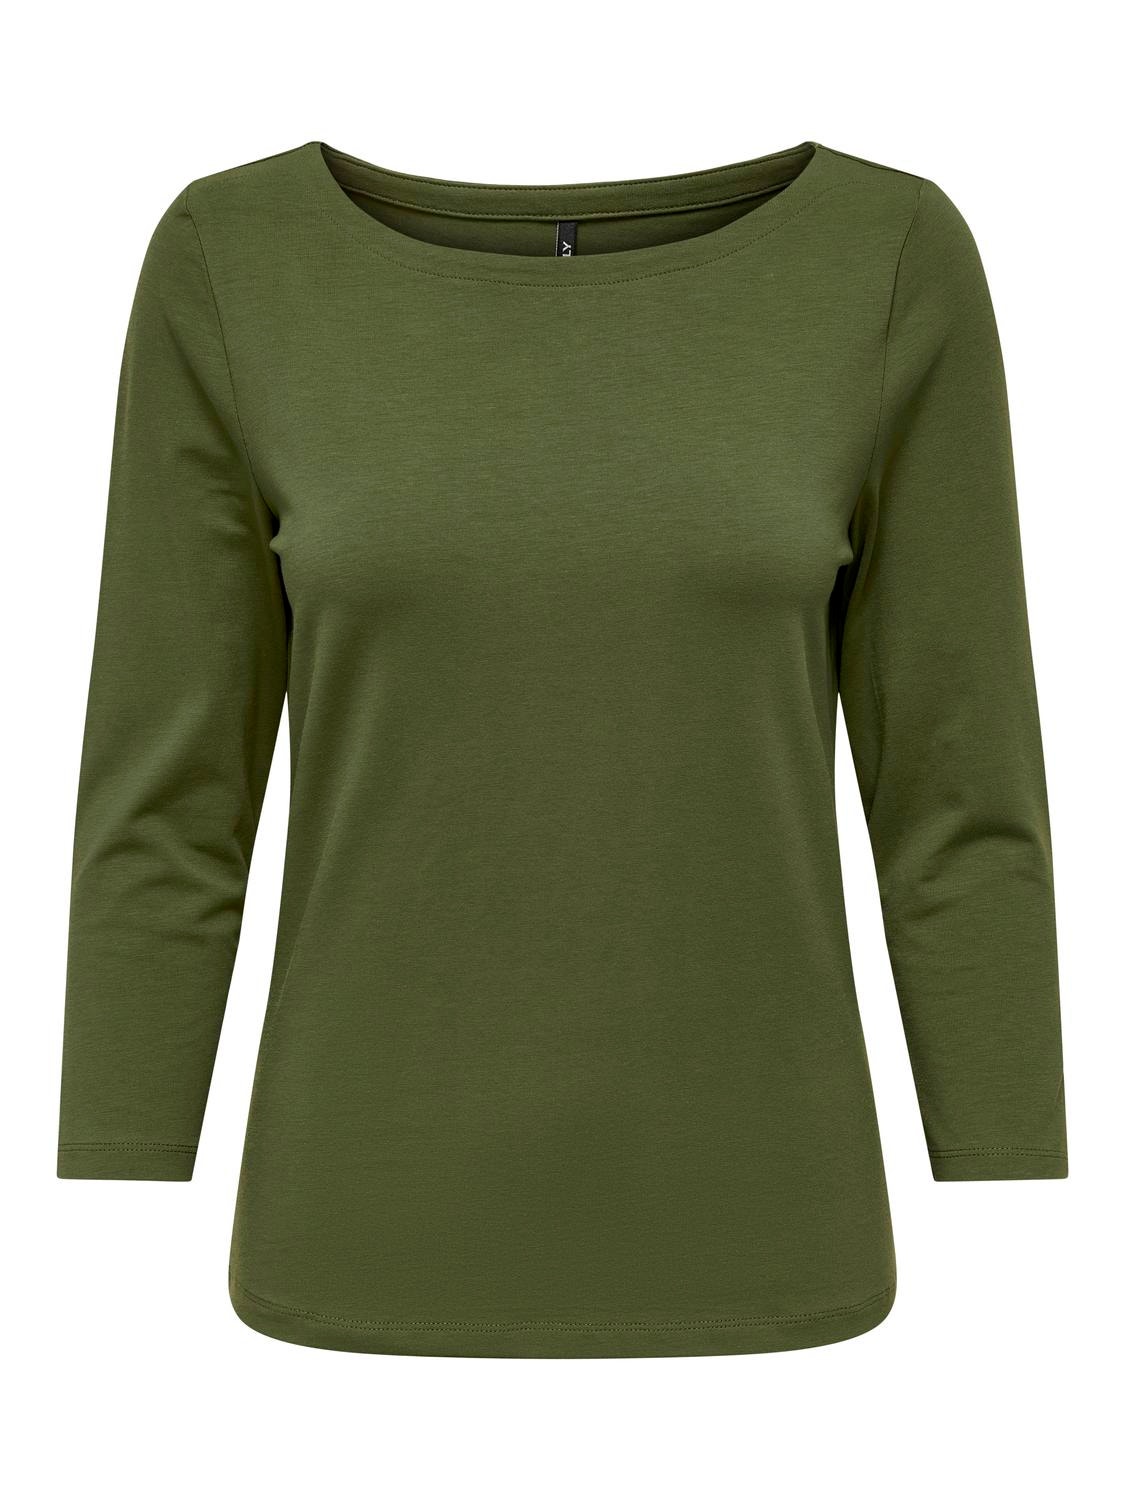 ONLY Boat neck Top -Winter Moss - 15237739